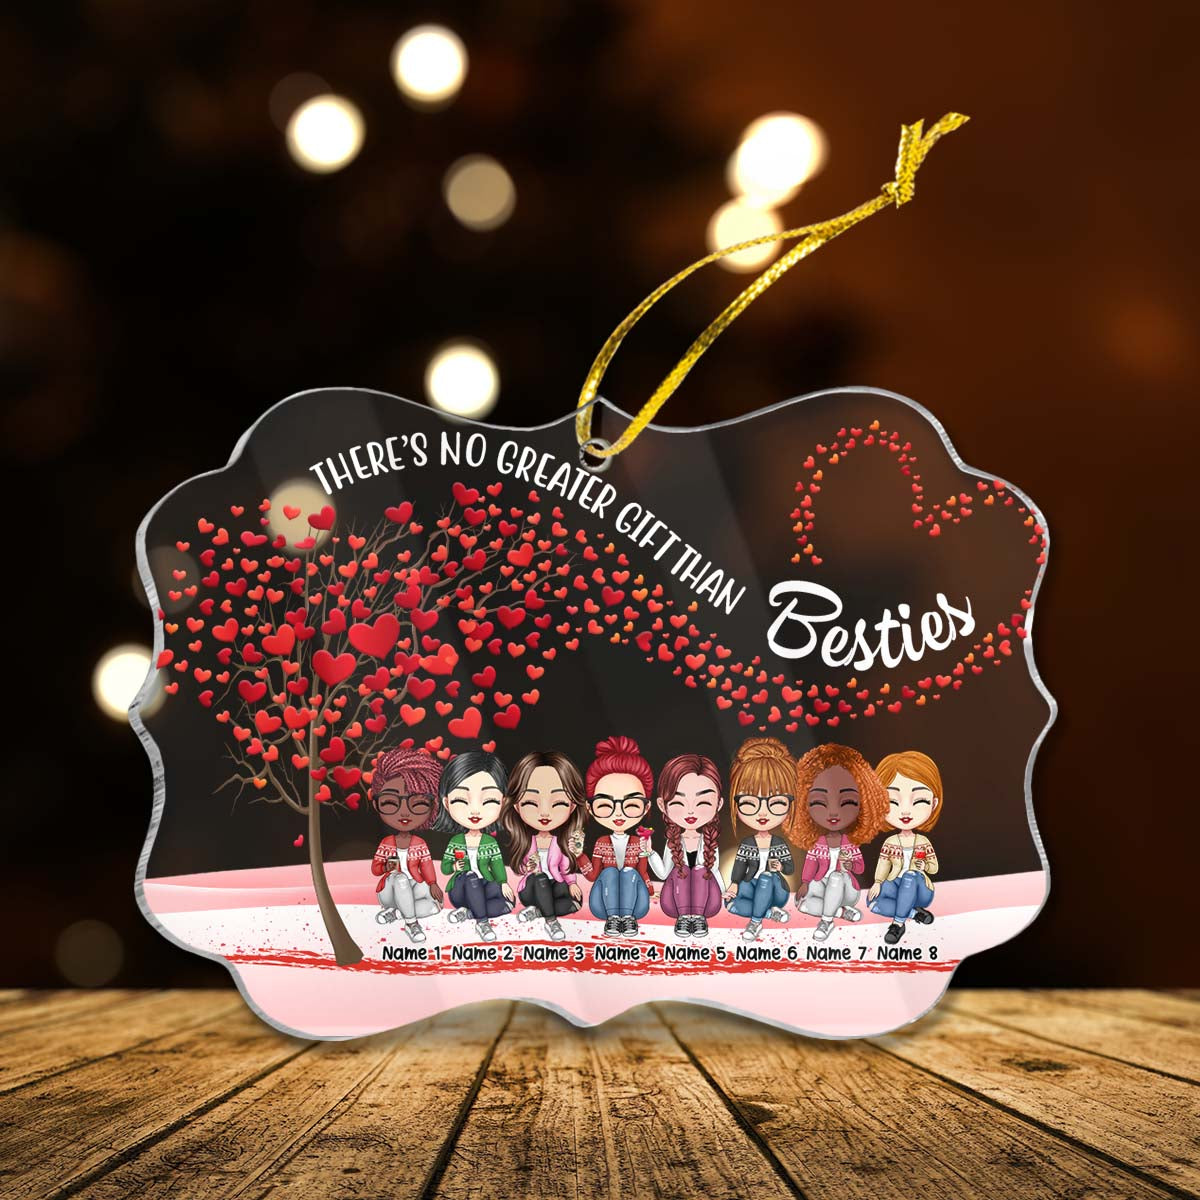 There's No Greater Gift Than Besties Personalized Custom Name Acrylic Ornaments - Christmas Gift